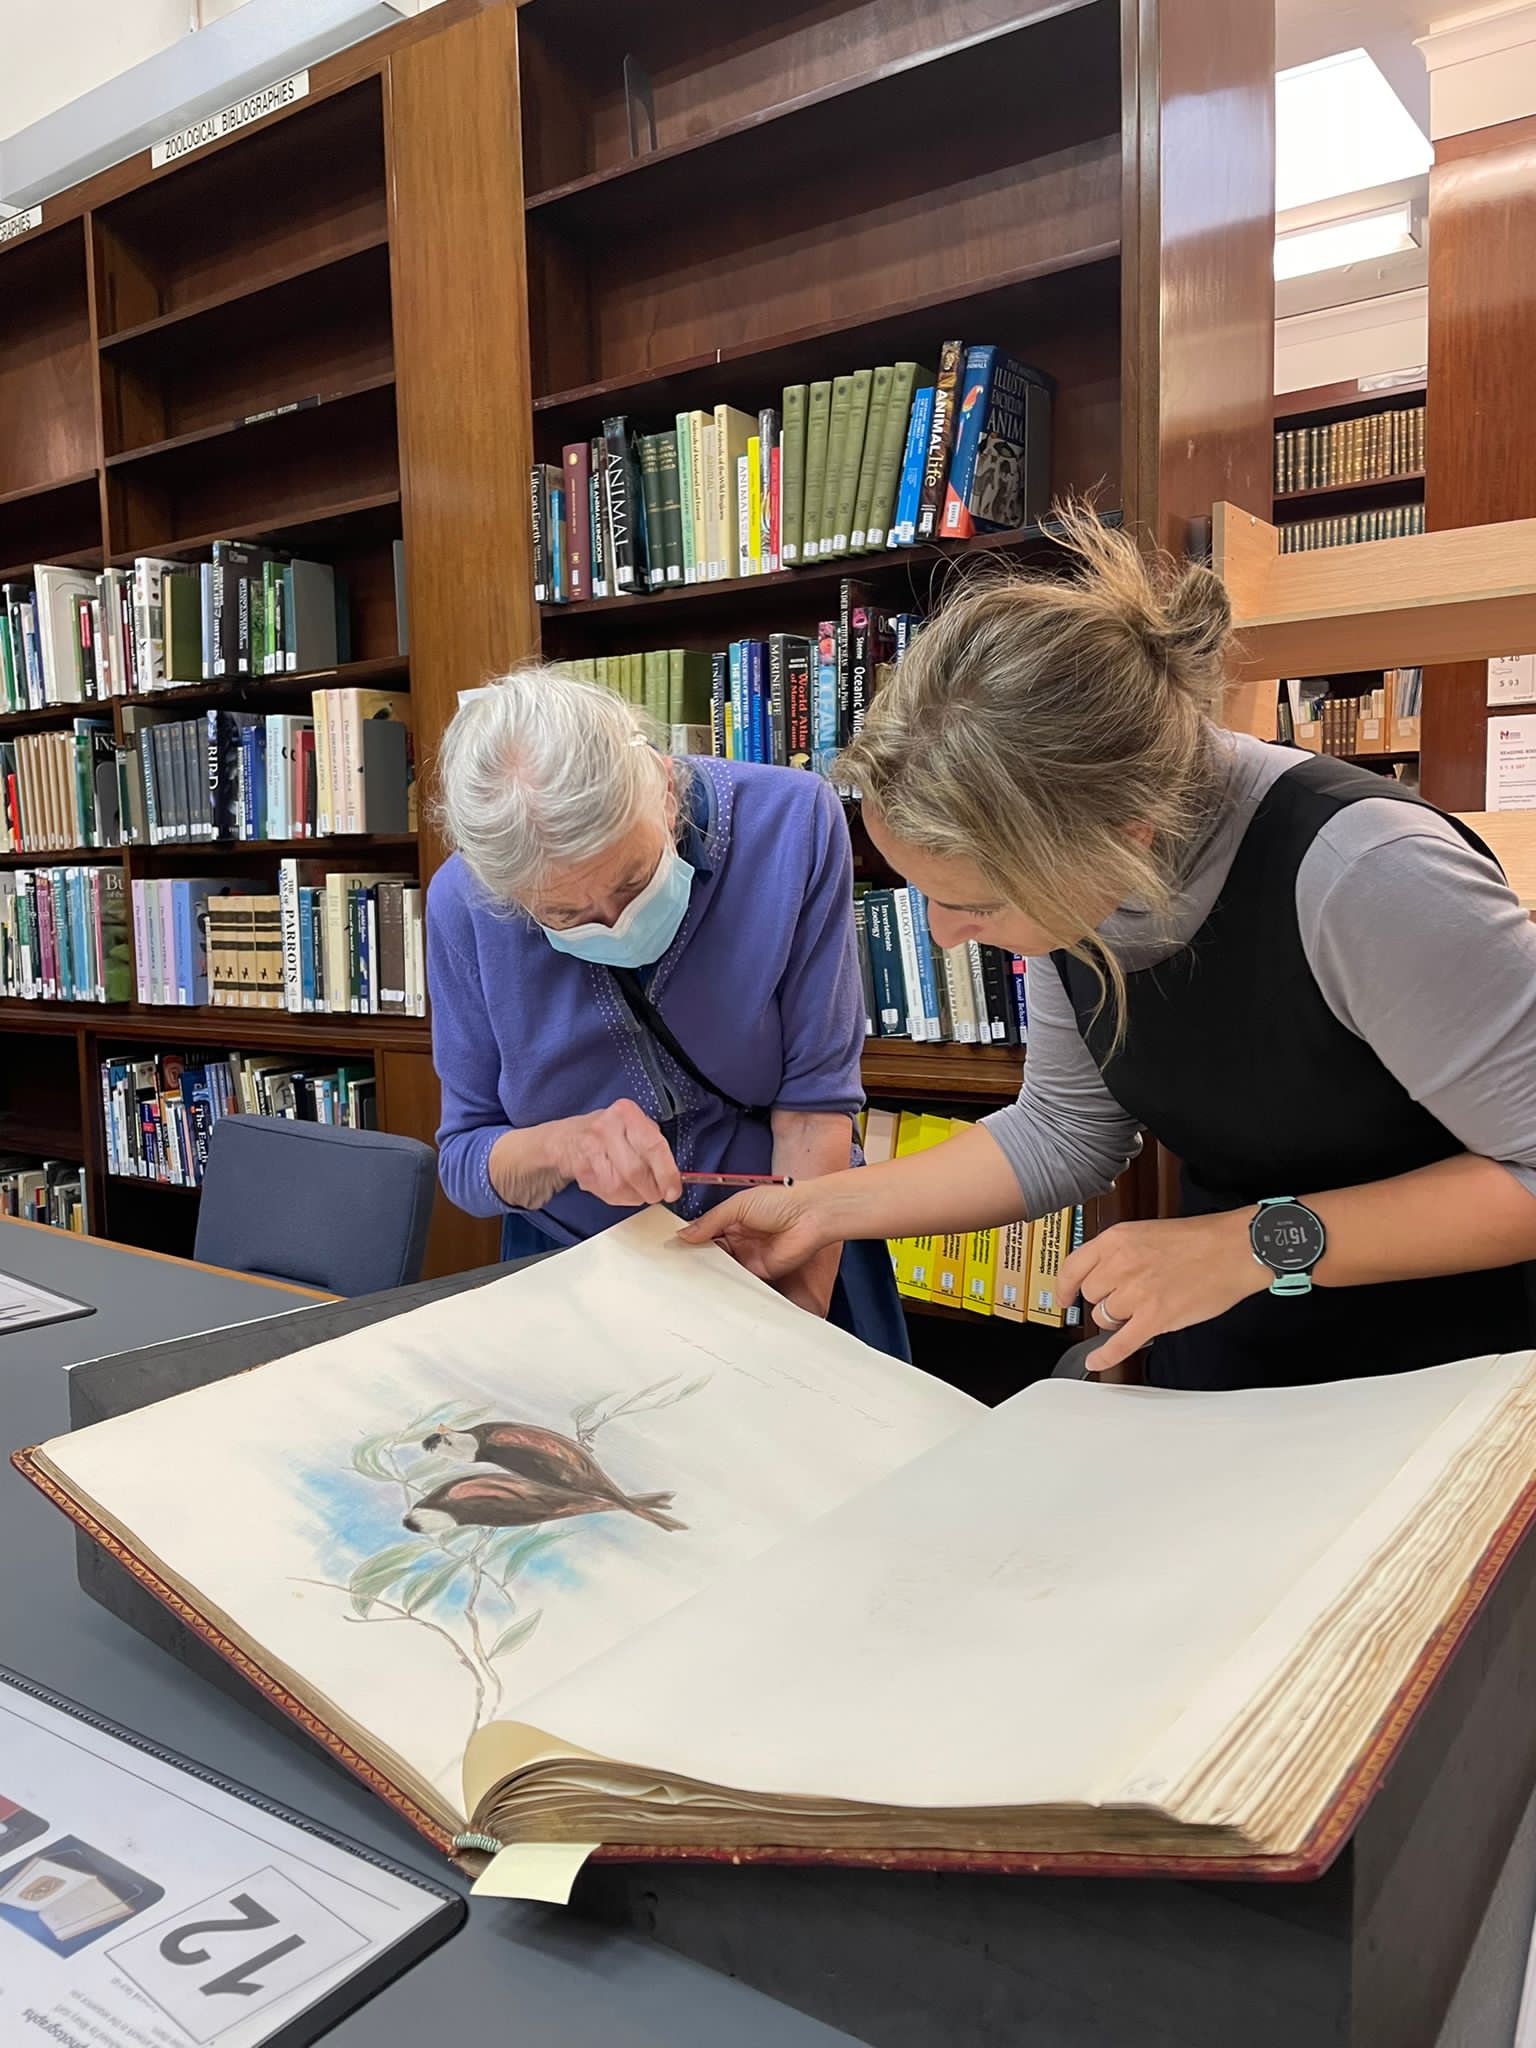 Andrea Hart and Ann Datta looking at an A1 sized bound book of Elizabeth Gould's original drawings in a library.